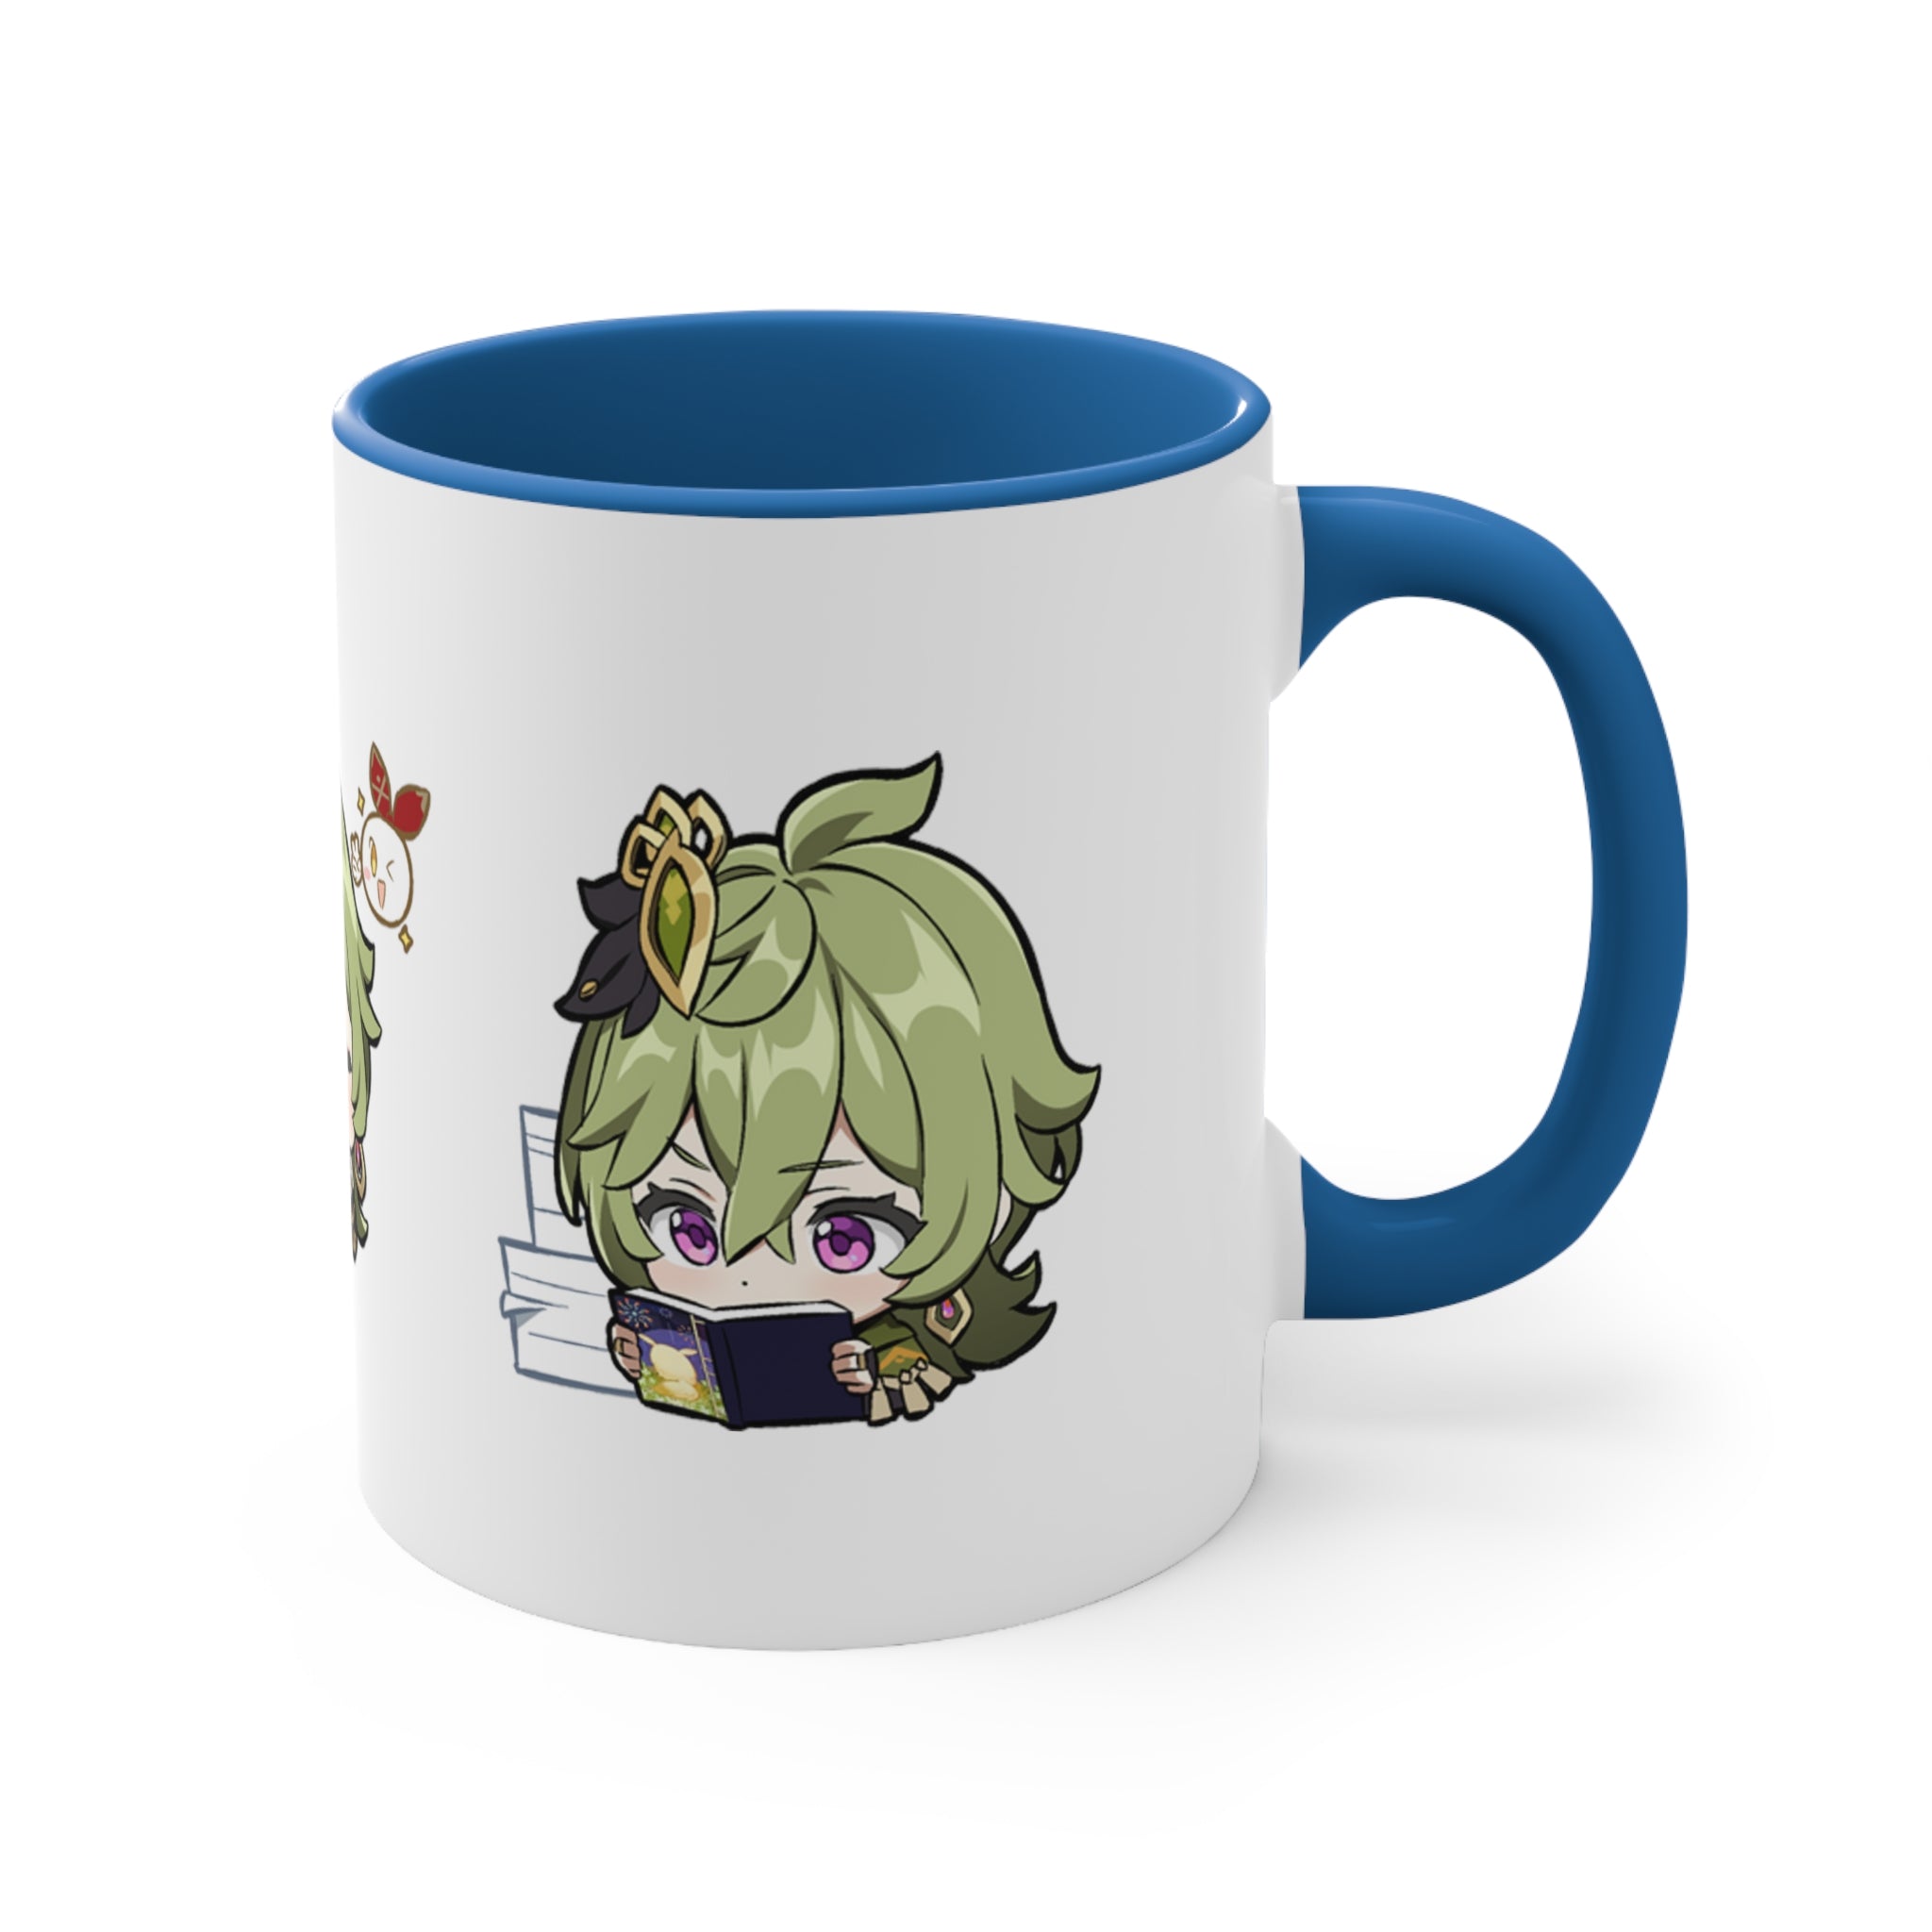 Collei Genshin Impact Accent Coffee Mug, 11oz Cups Mugs Cup Gift For Gamer Gifts Game Anime Fanart Fan Birthday Valentine's Christmas